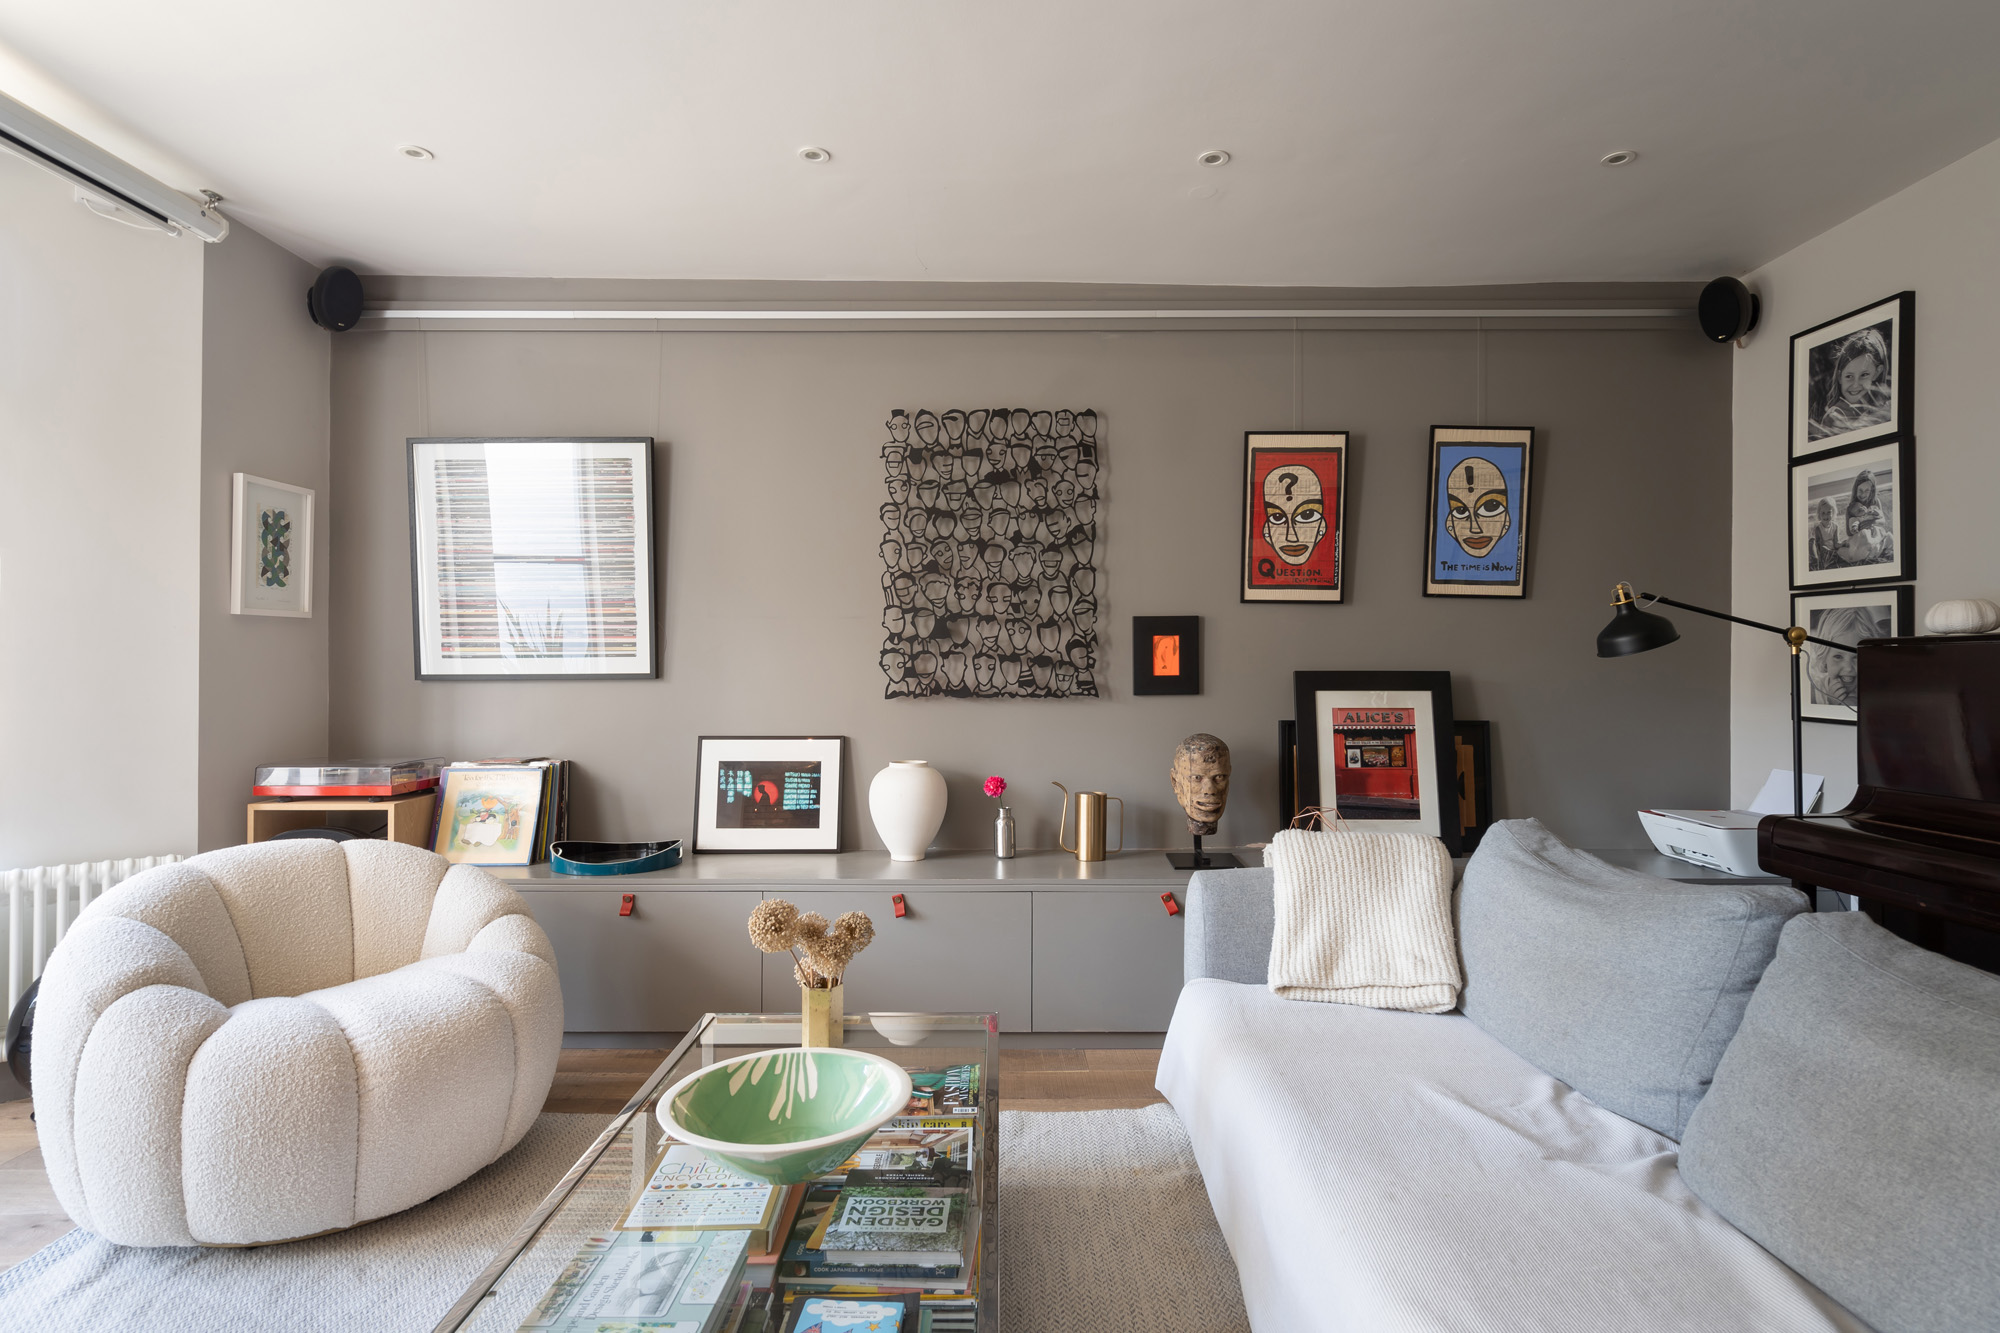 For Sale: St Marks Road North Kensington W10 stylish reception room with luxury interior design